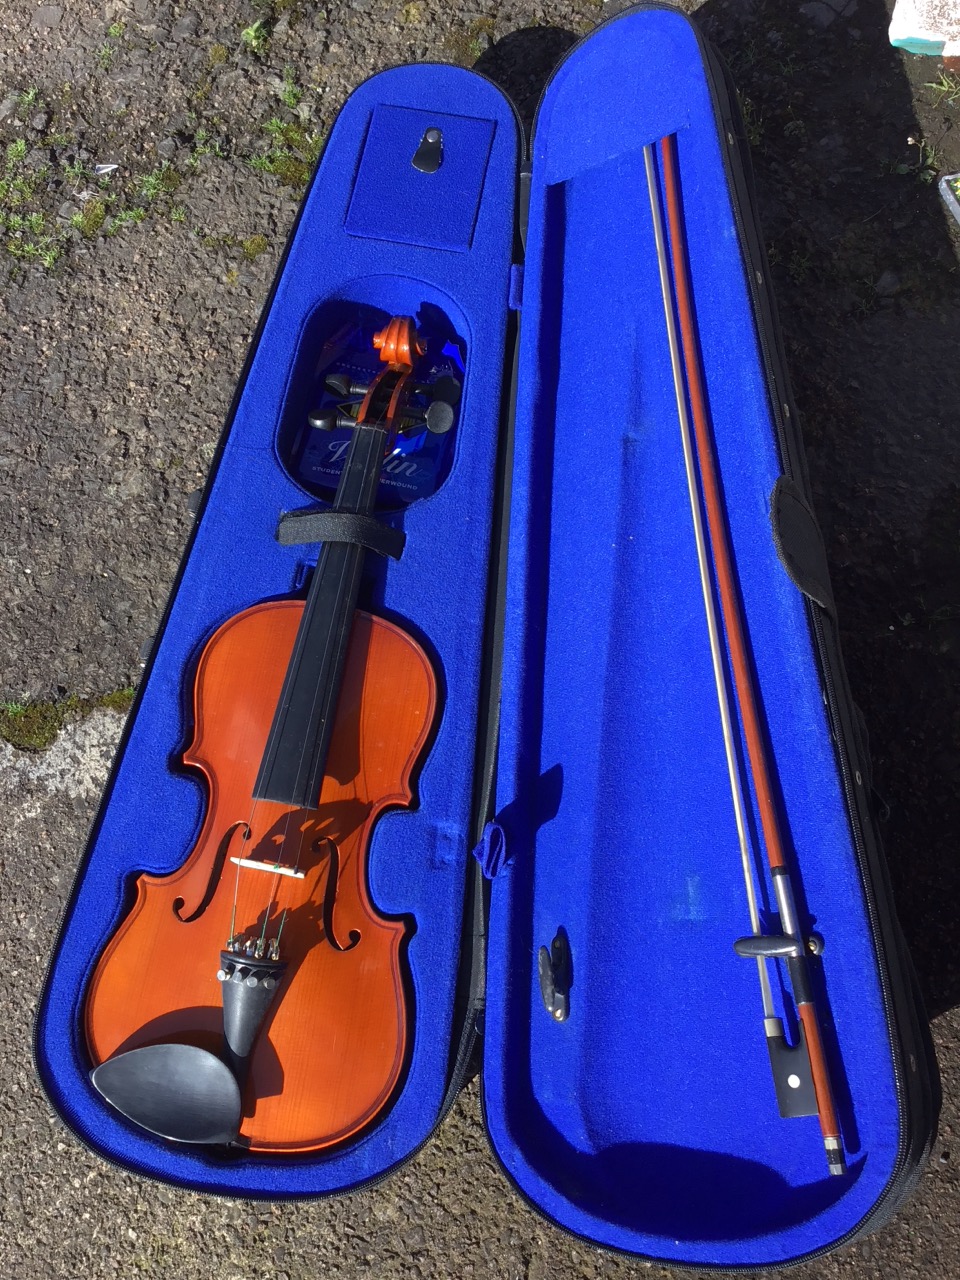 A cased Yamada violin with bow, and a spare set of strings - looks unplayed? (21.75in)